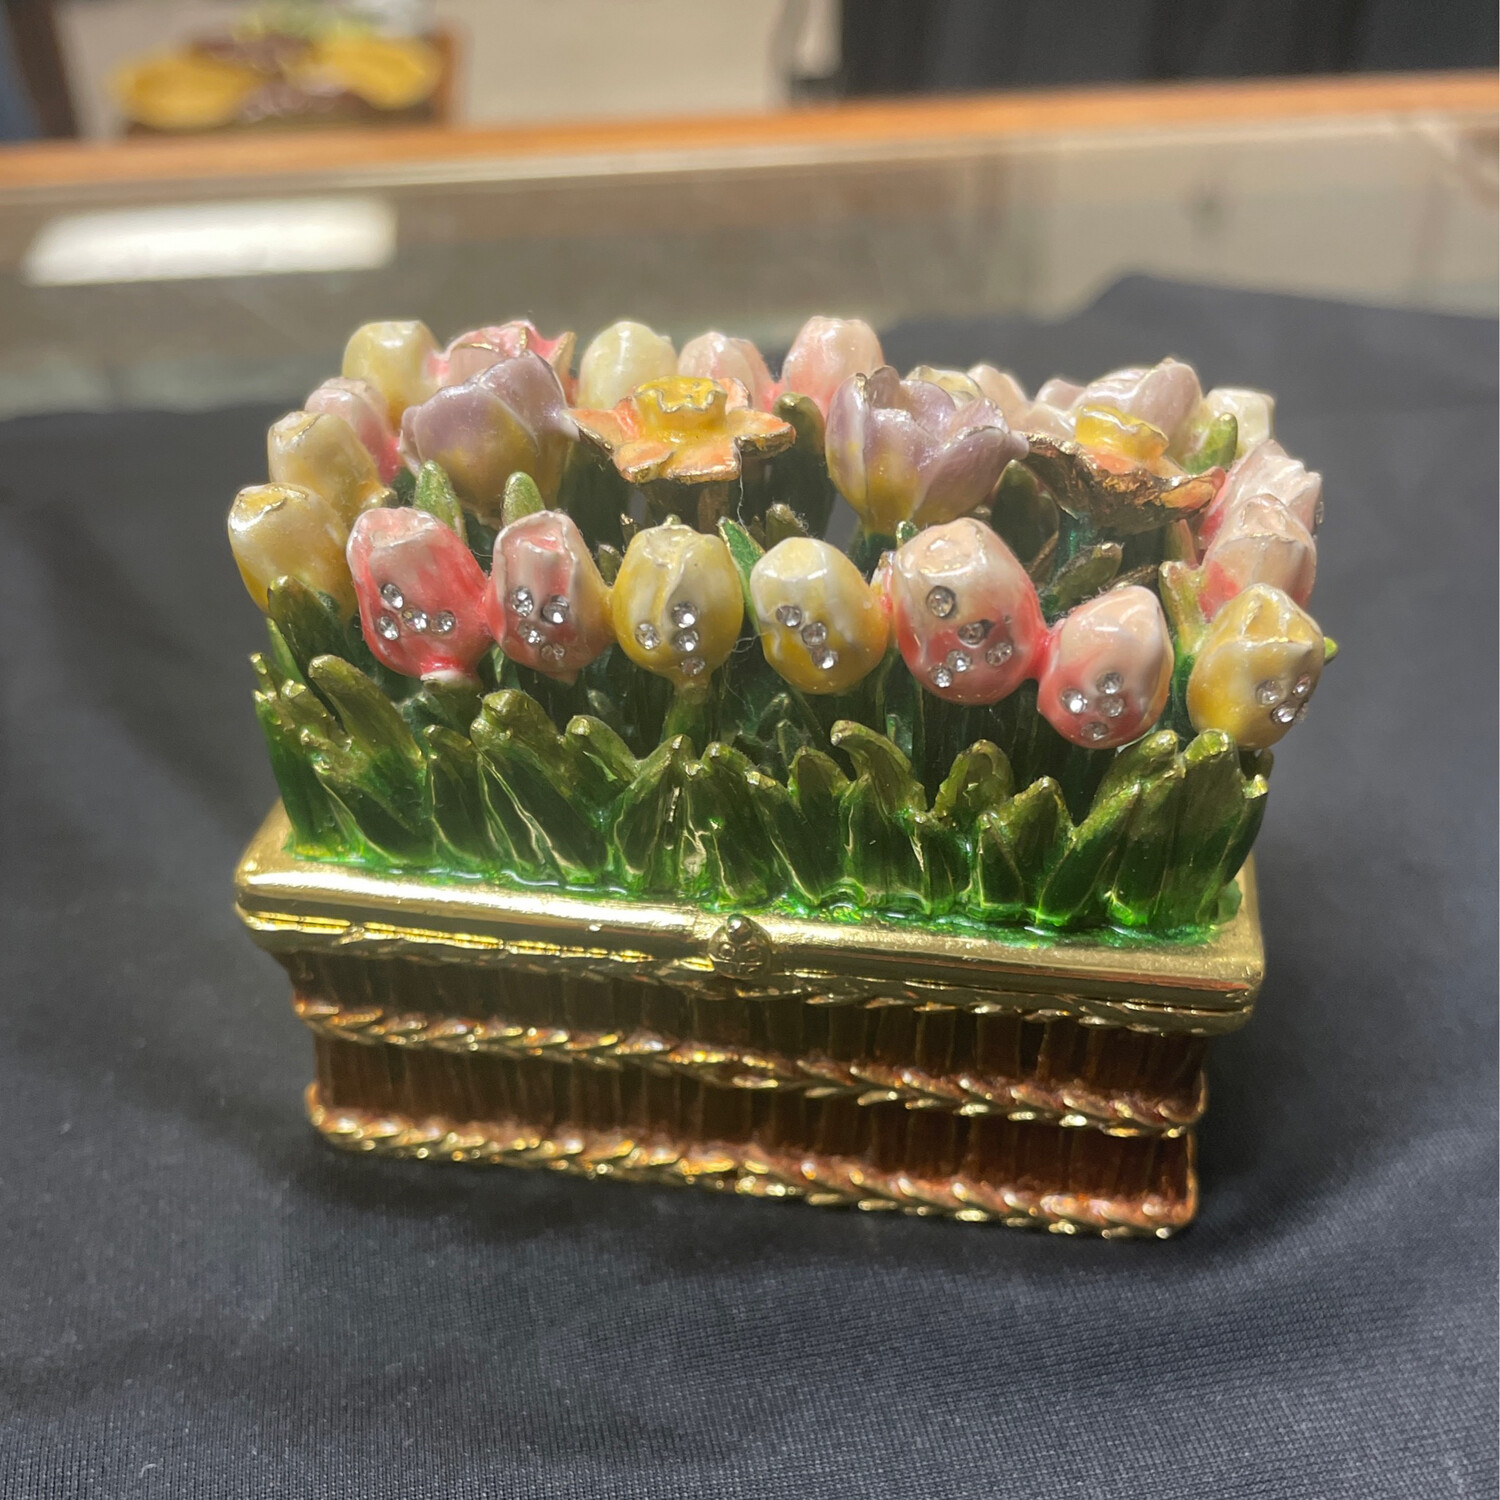 Trinket Box with Tulips and Dafodils